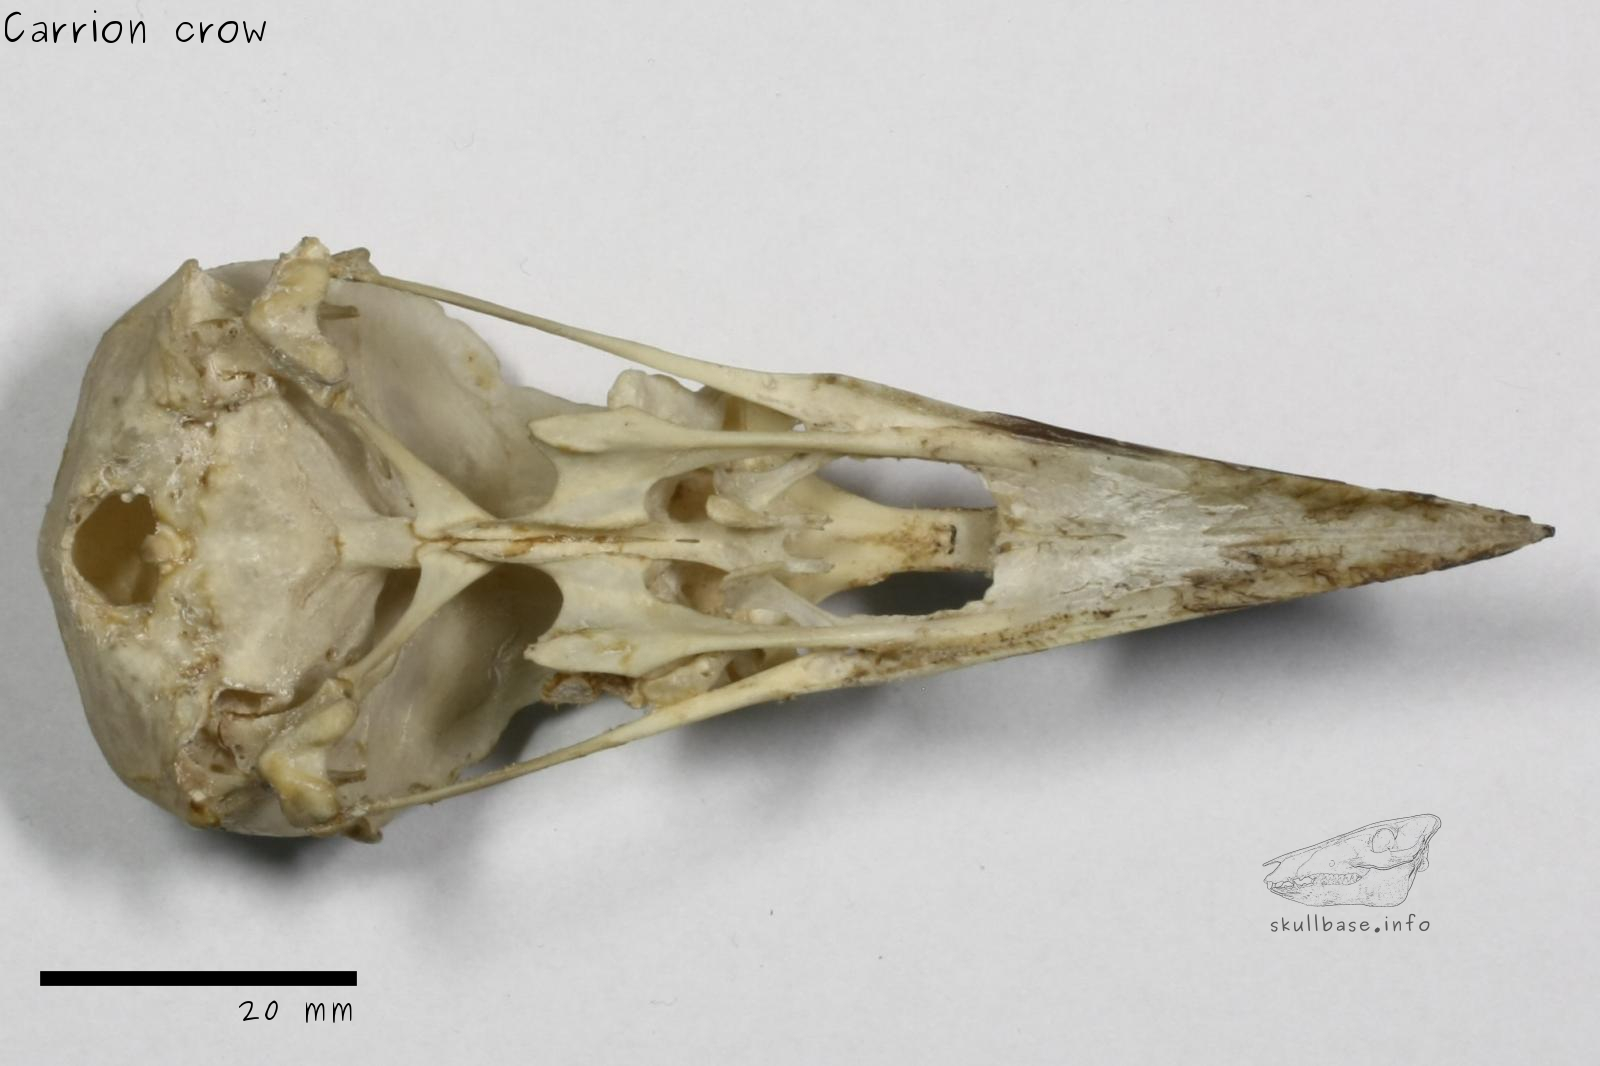 Carrion crow (Corvus corone) skull ventral view